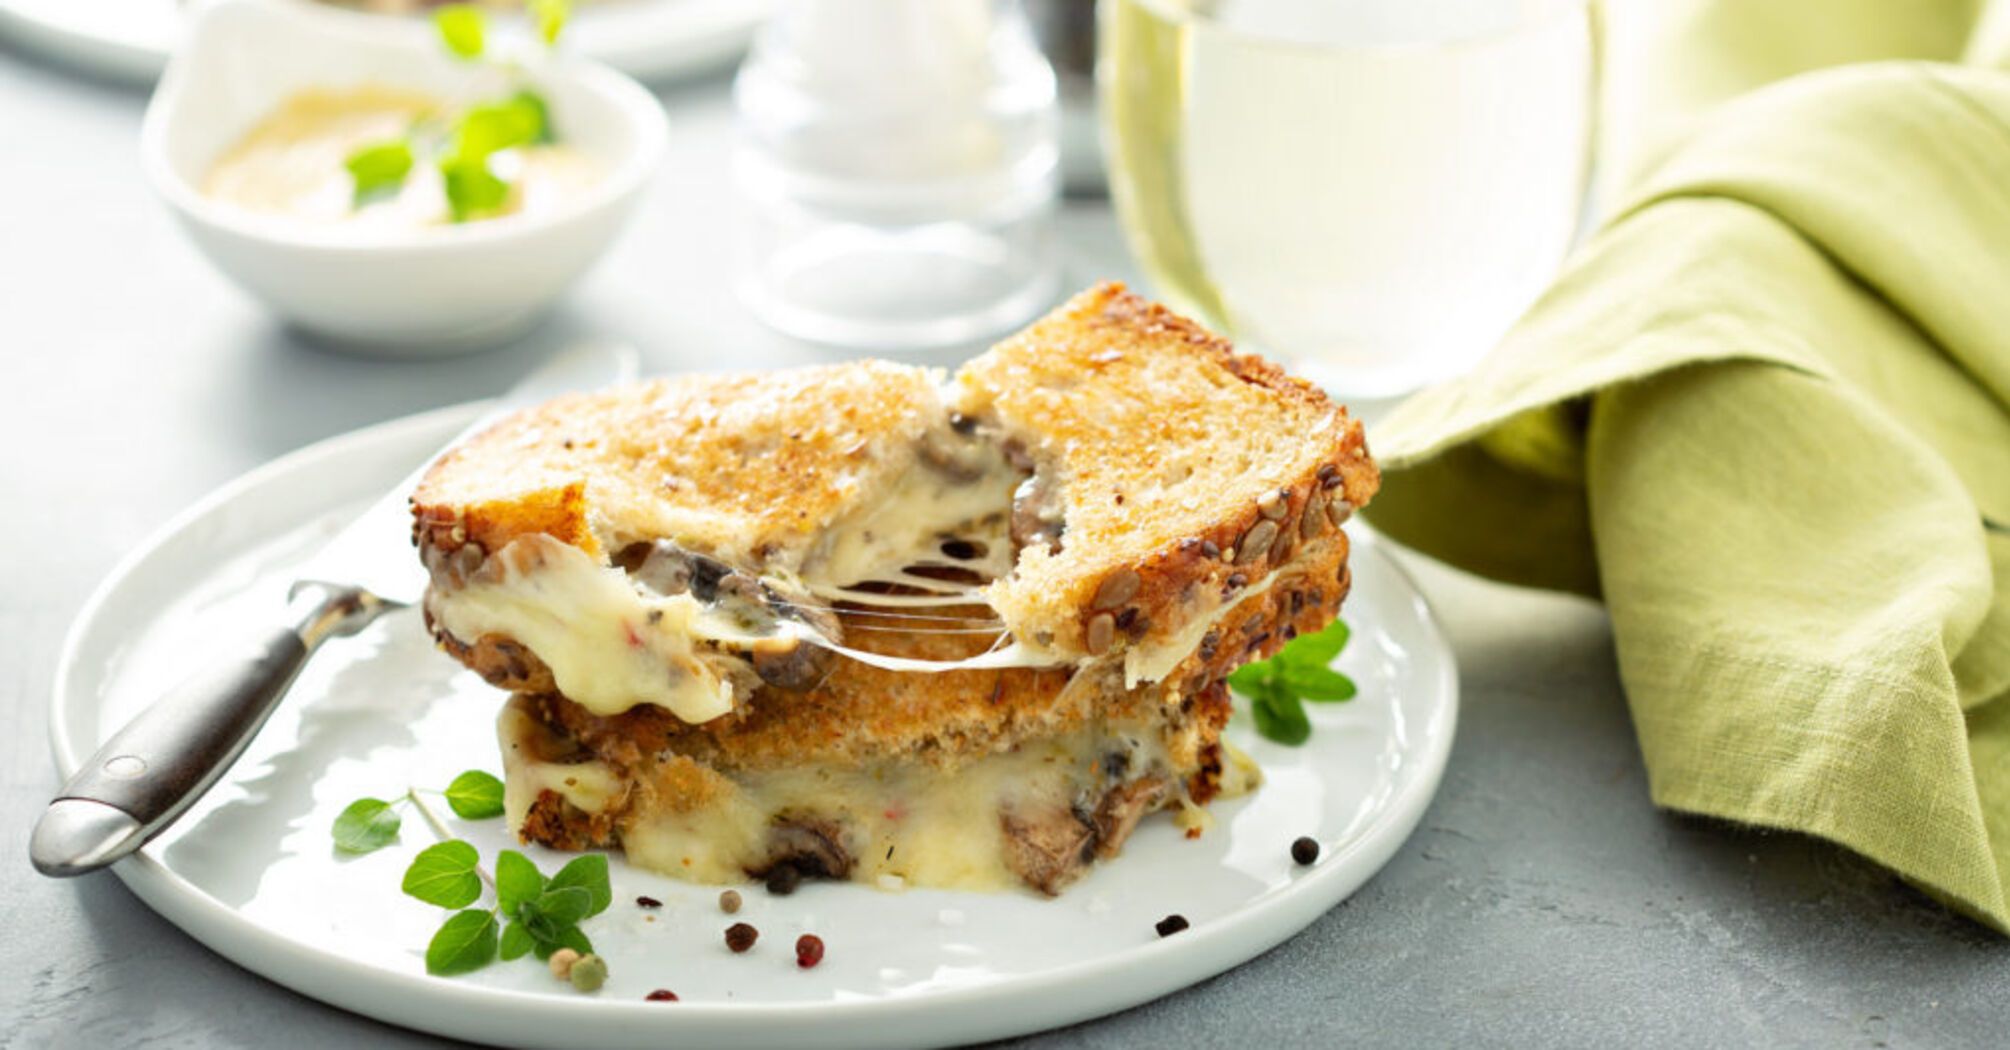 How to make delicious mushroom and cheese sandwiches: a budget snack option